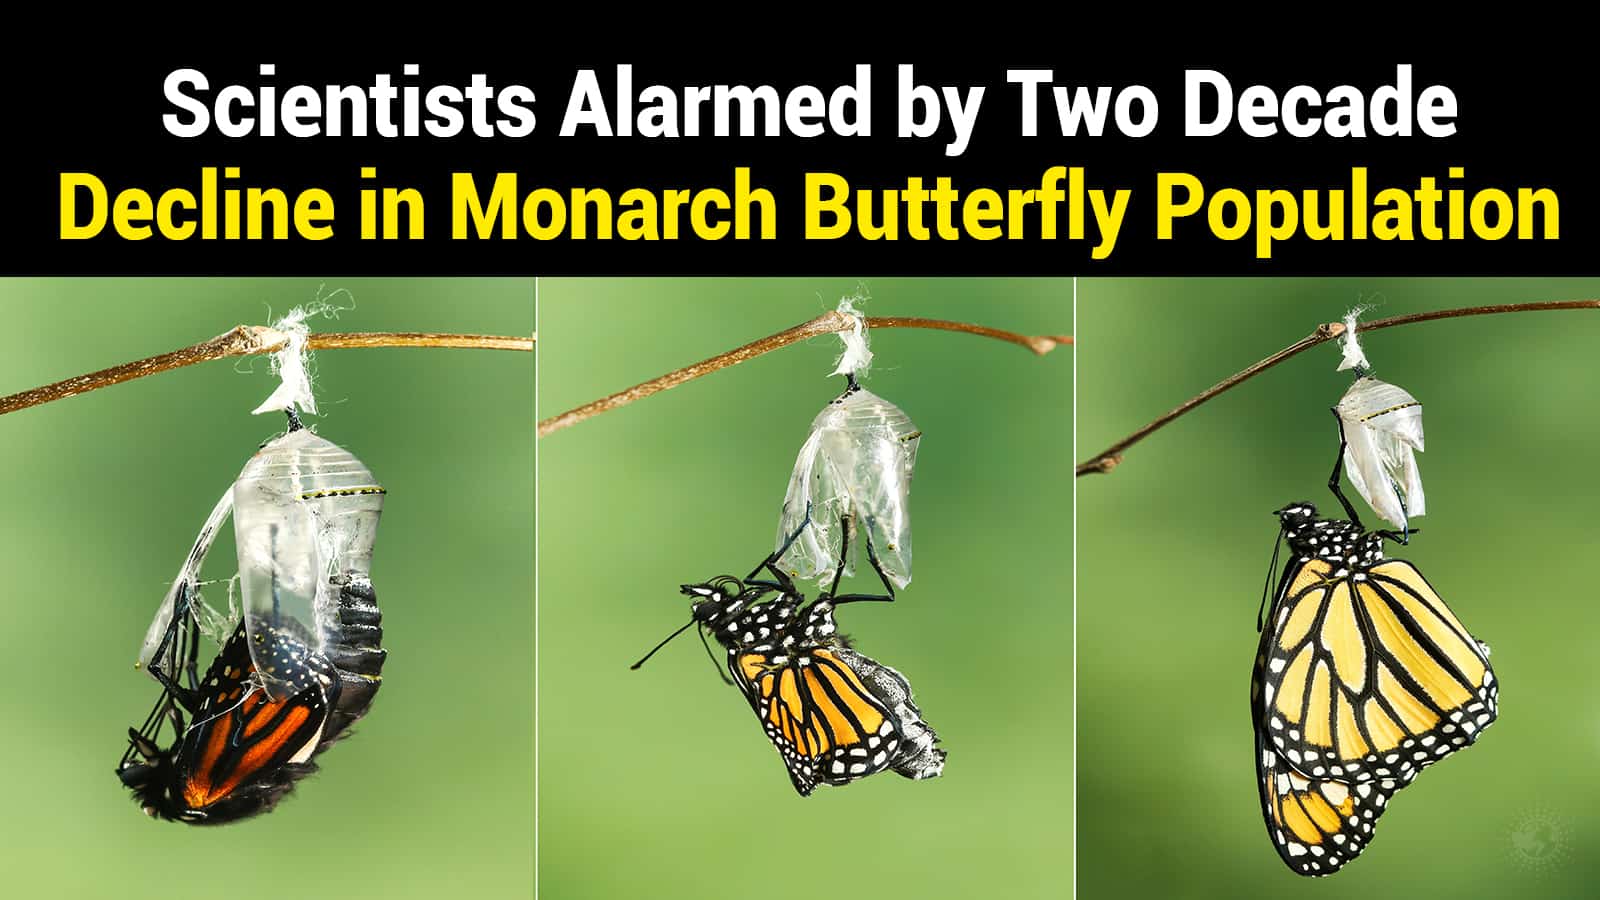 Scientists Alarmed by Two Decade Decline in Monarch Butterfly Population